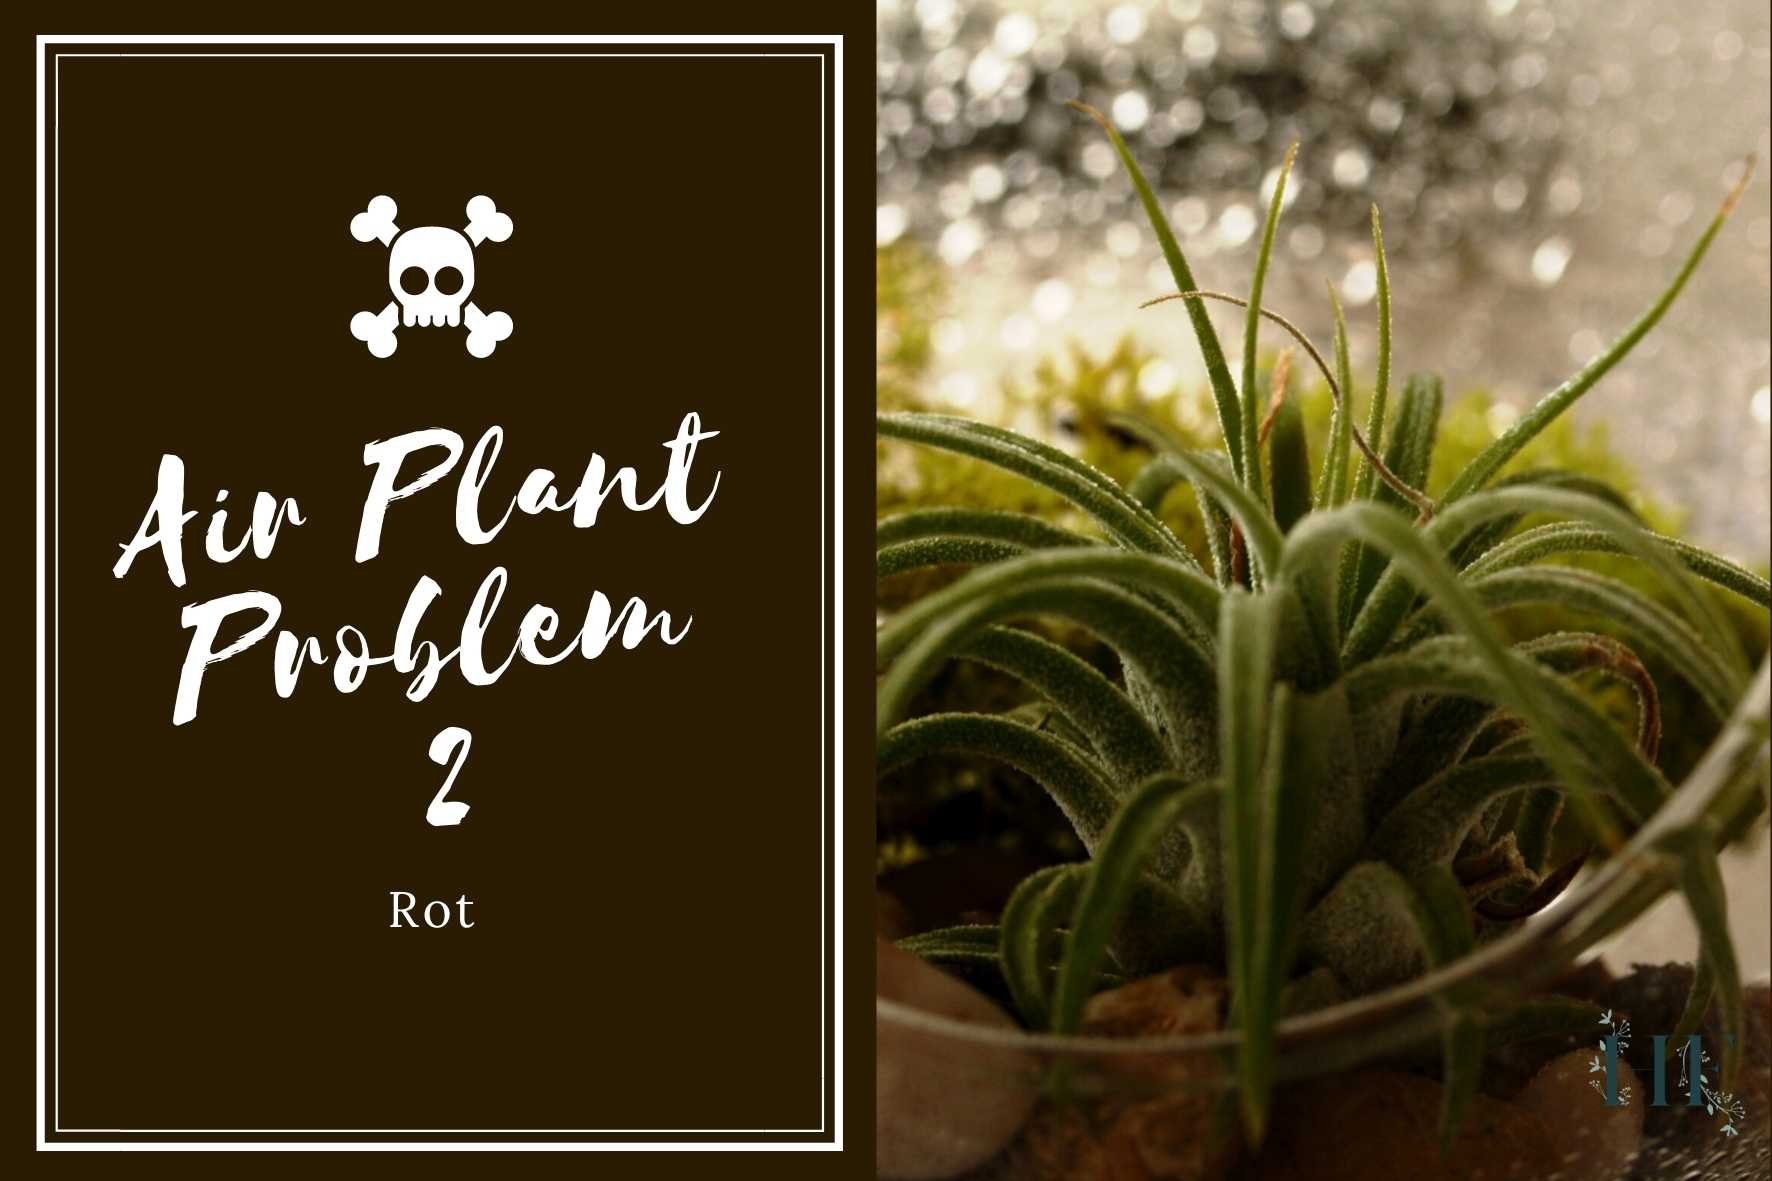 air-plant-problems-2-rot